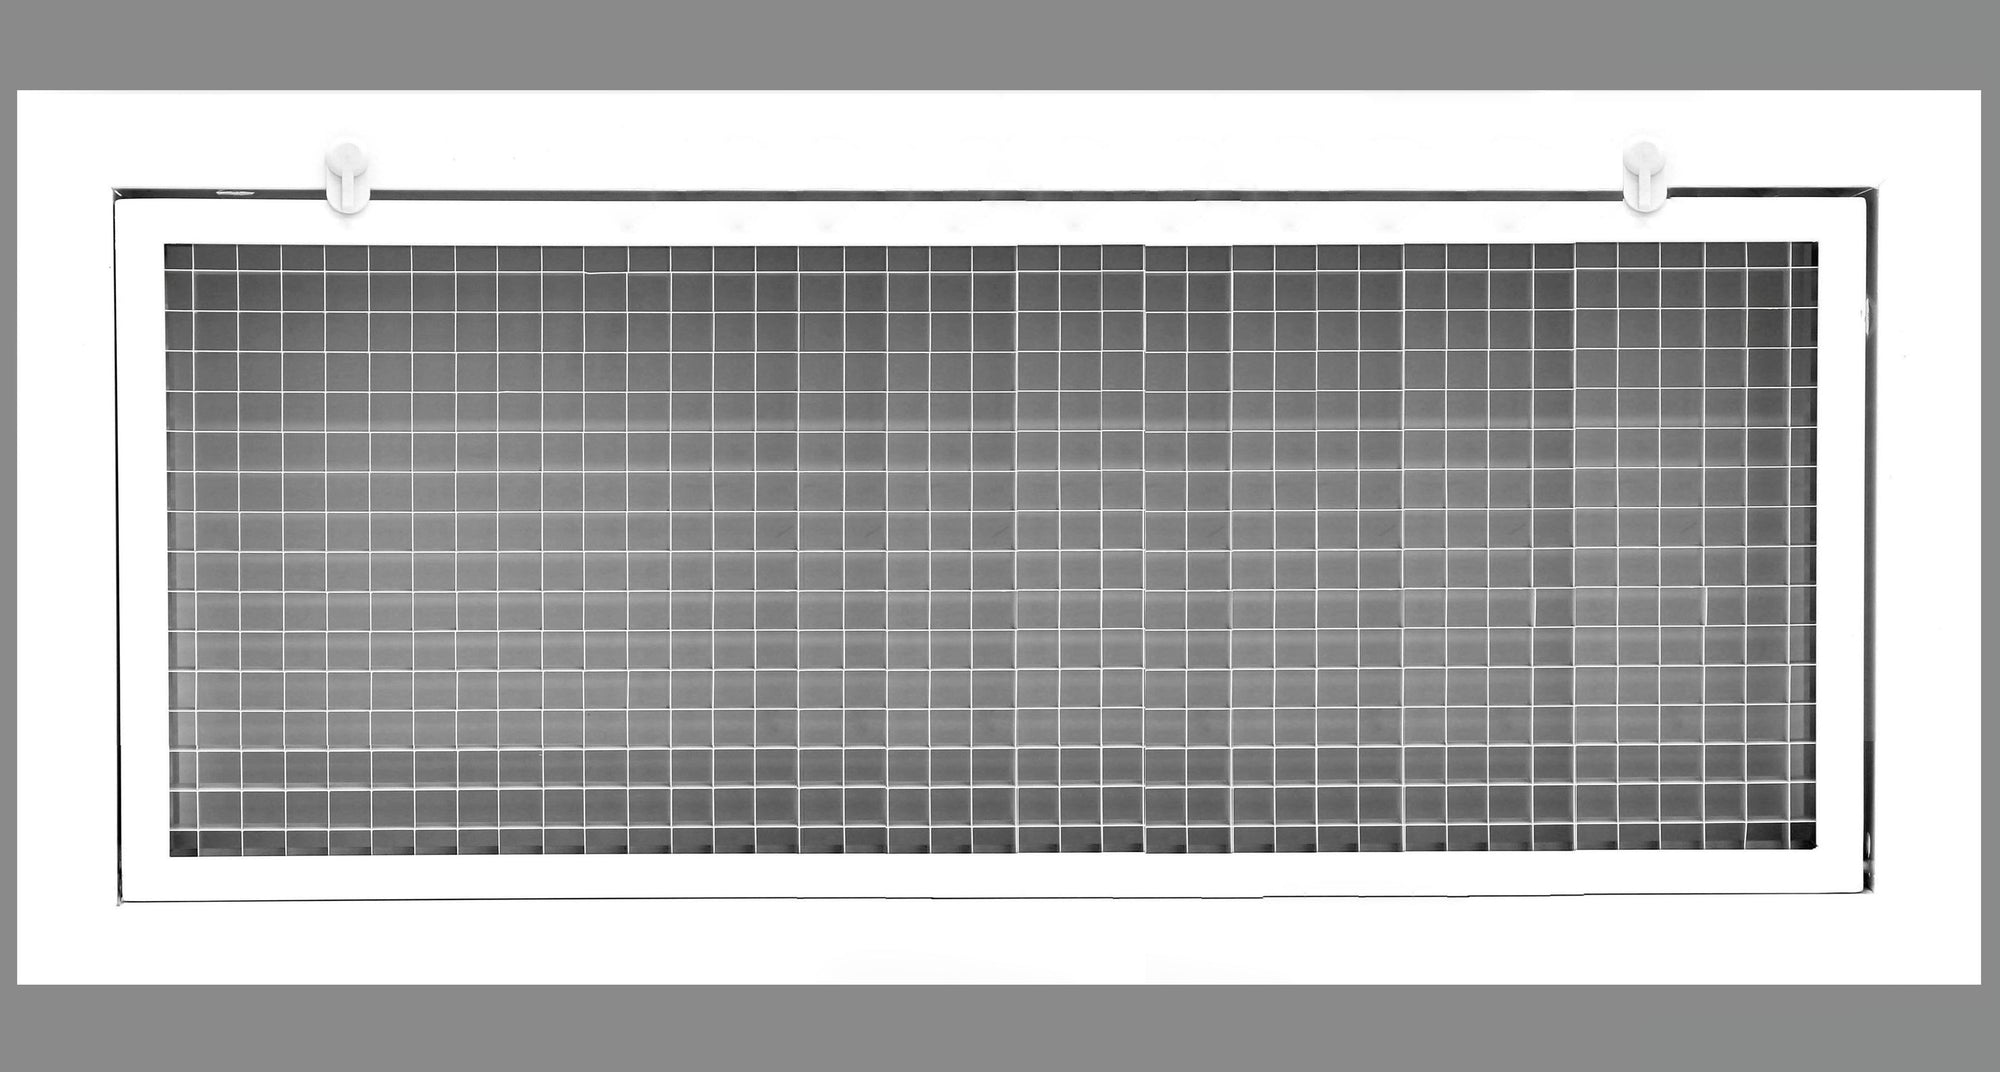 30" x 10" Cube Core Eggcrate Return Air Filter Grille for 1" Filter